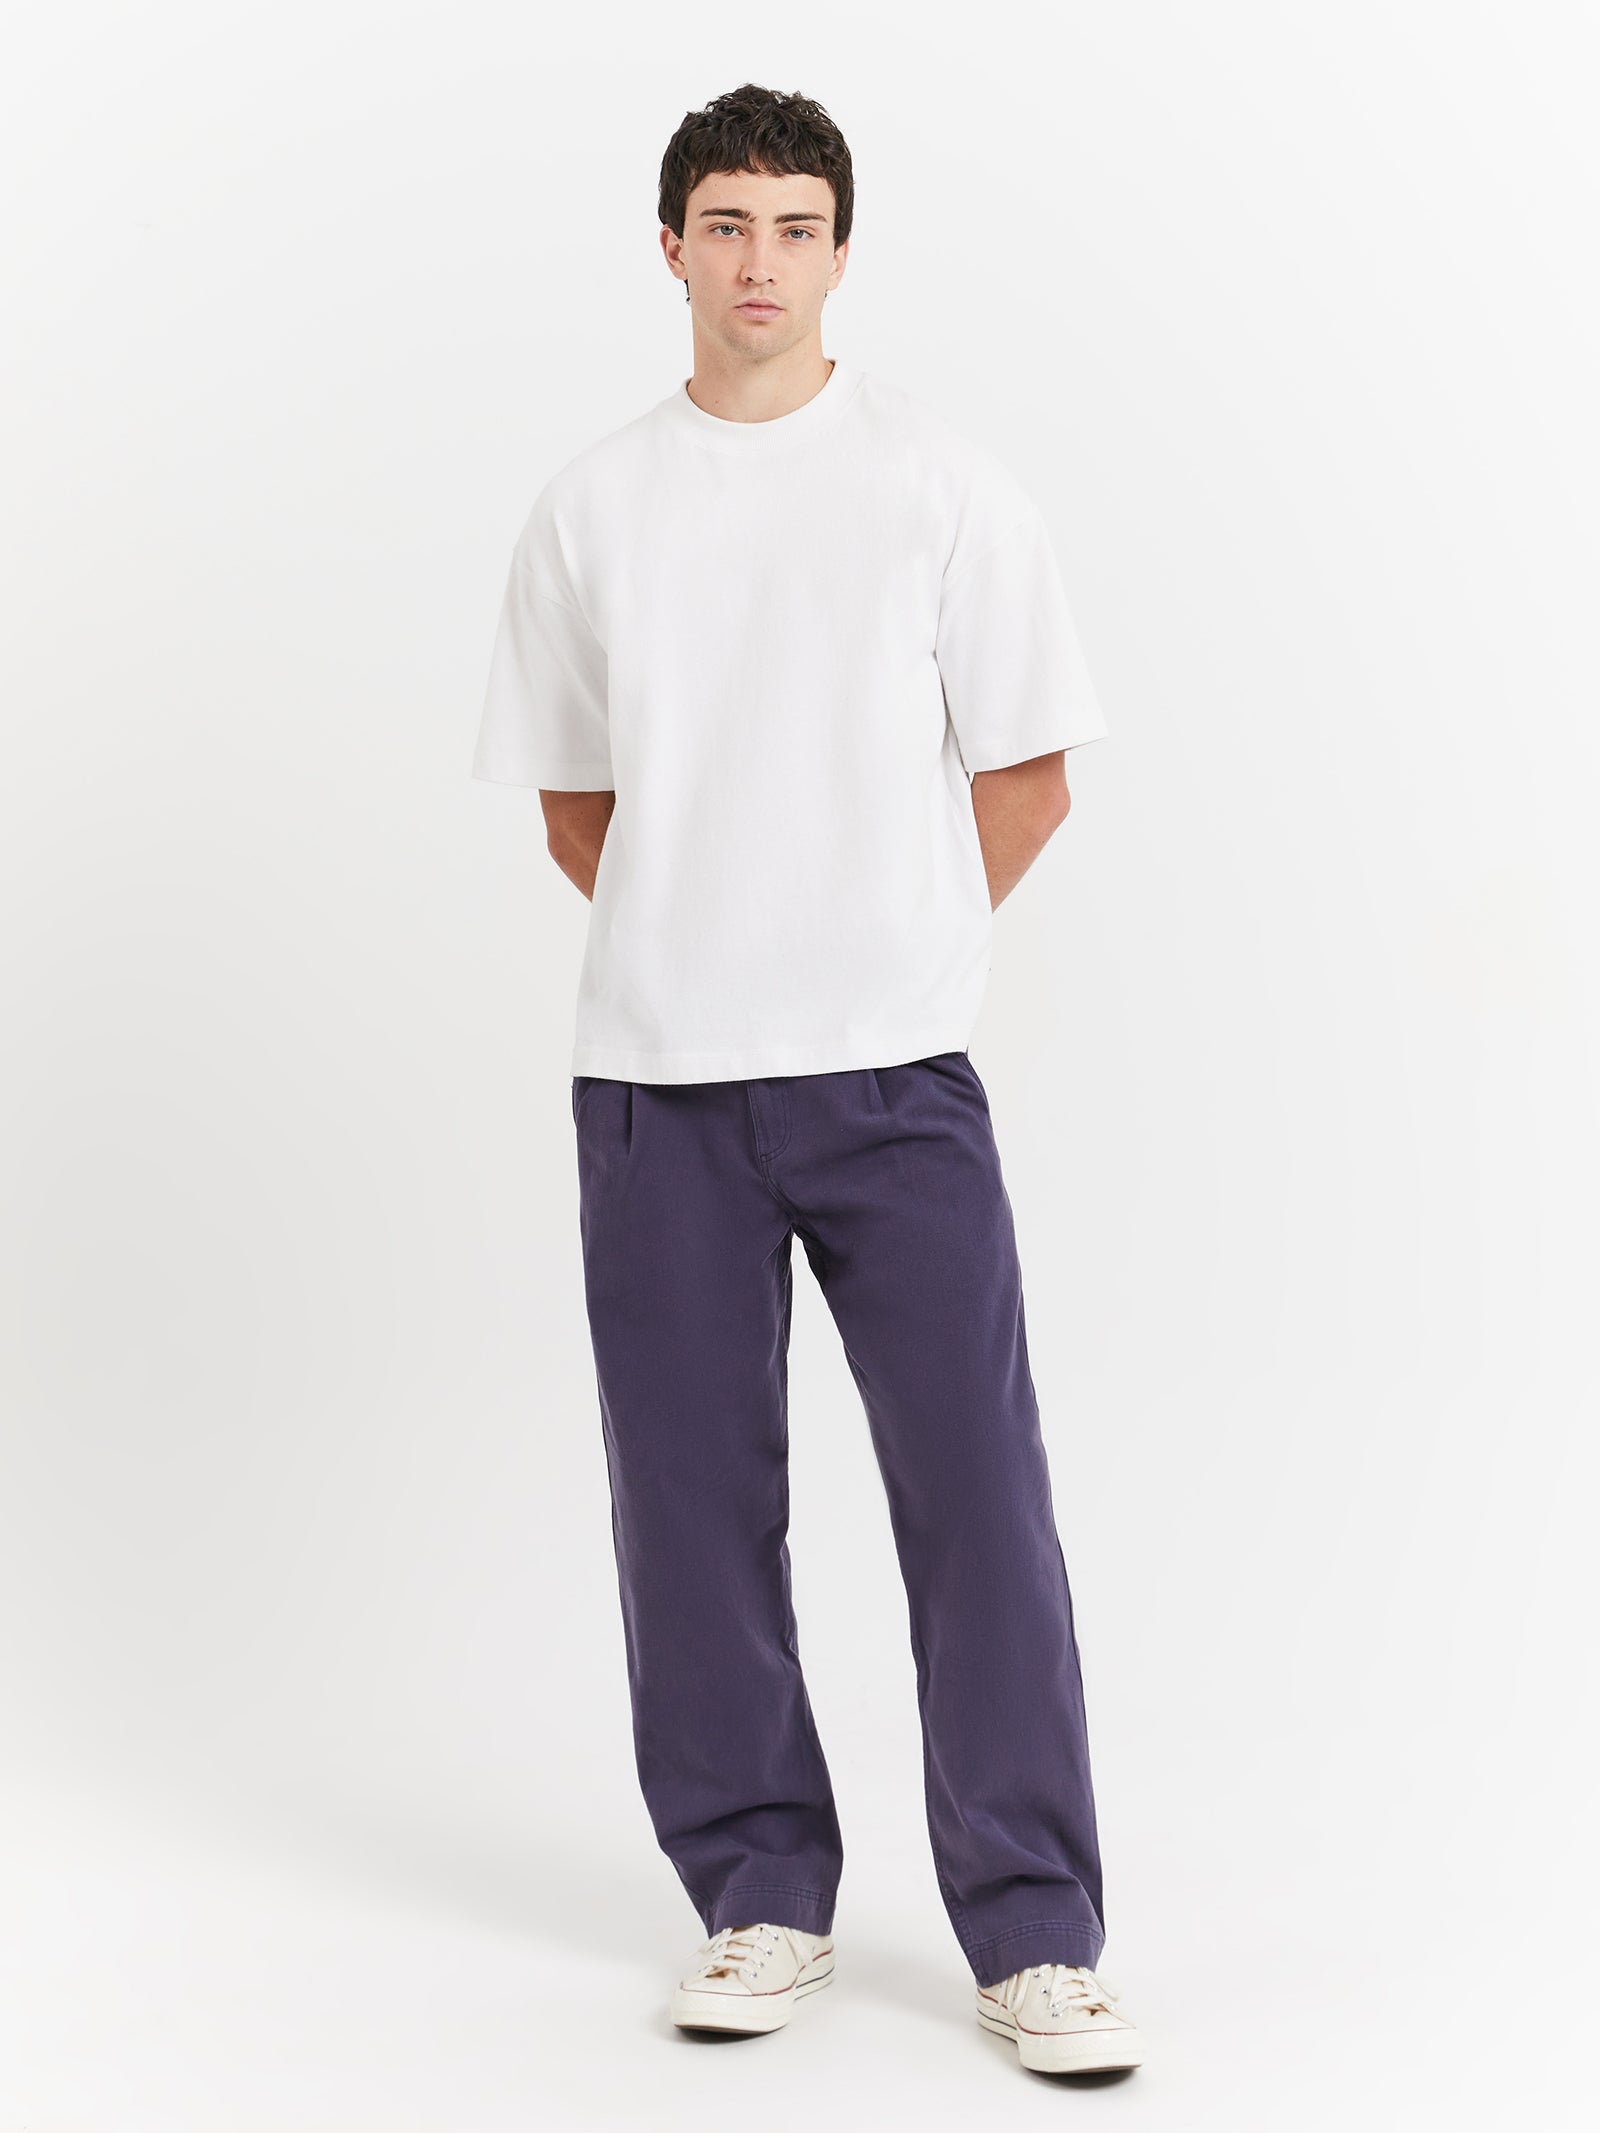 Finley Relaxed Jeans in Storm